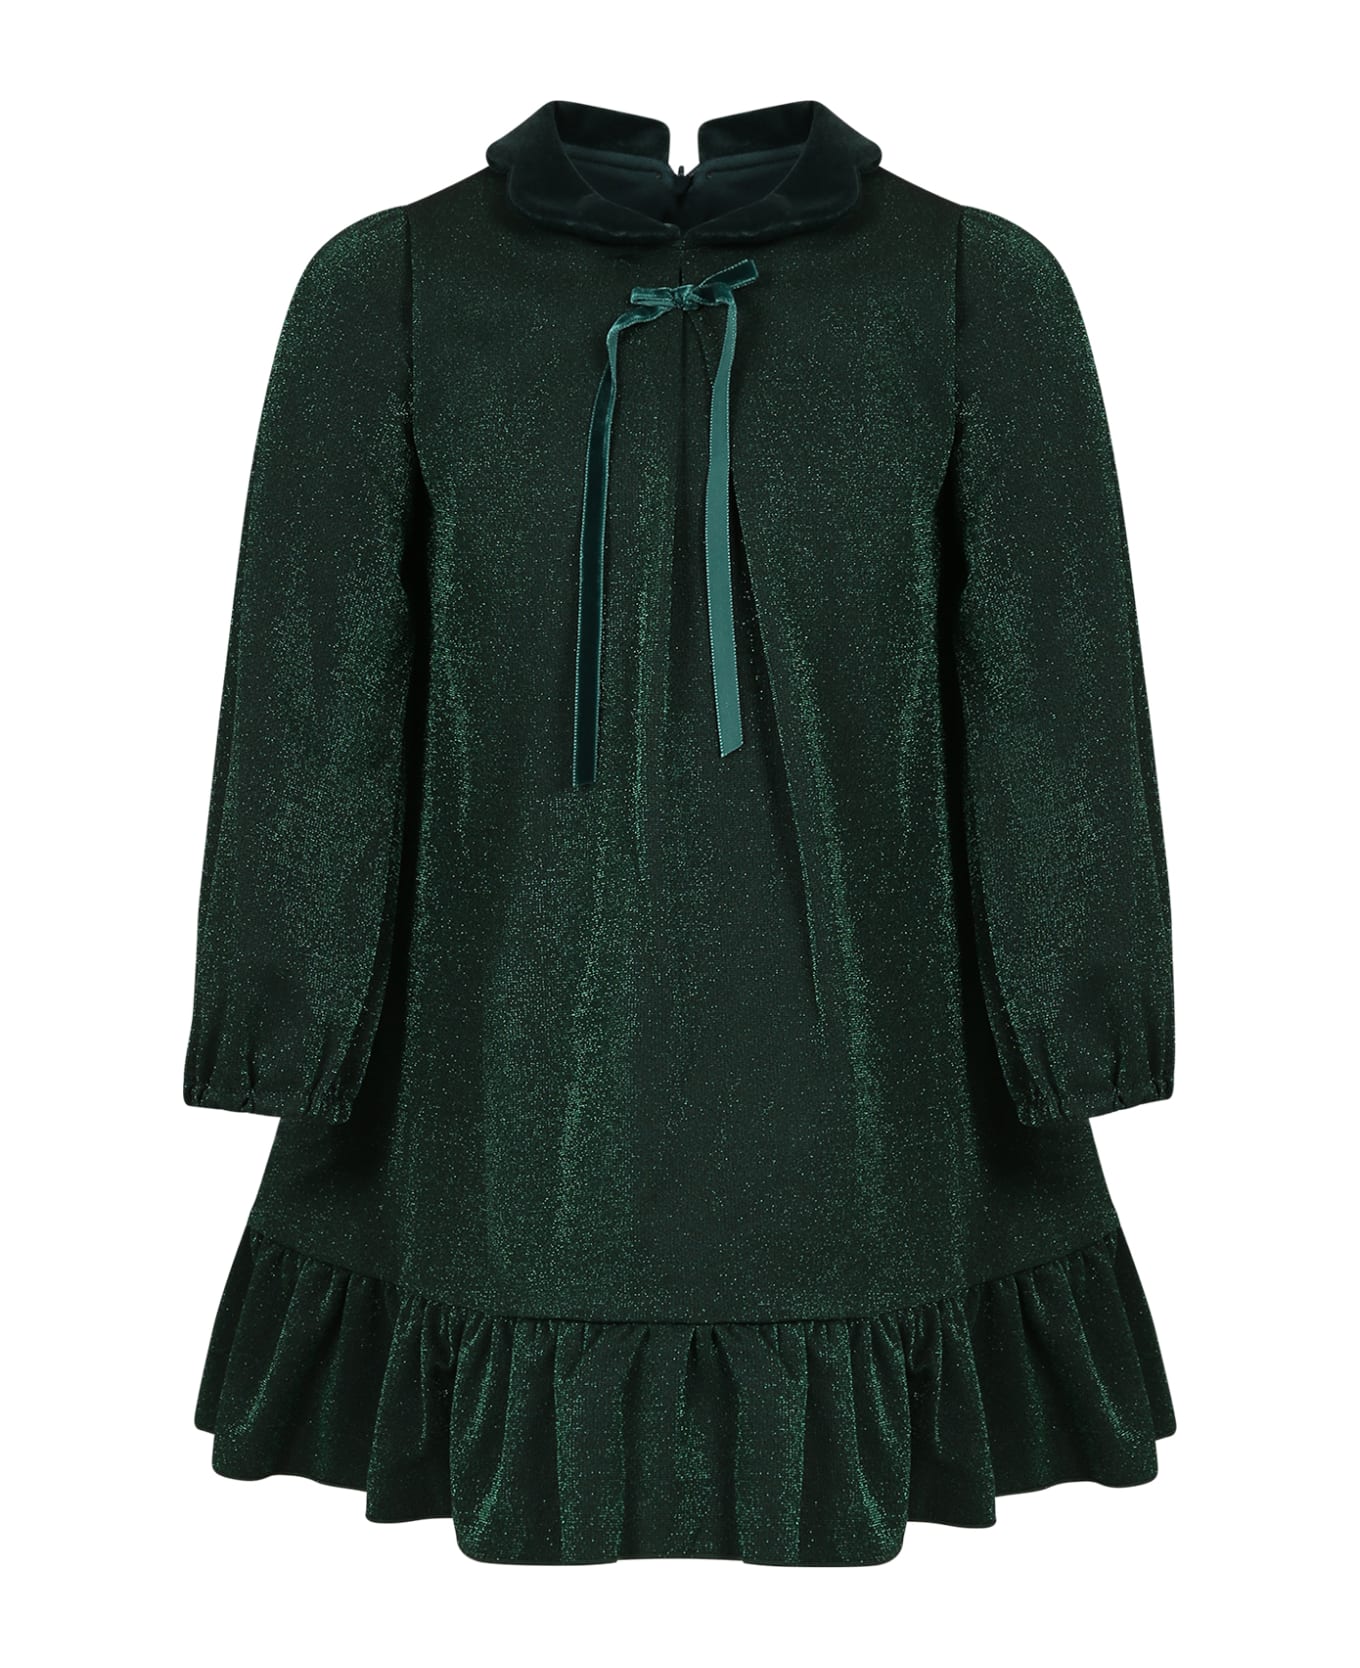 La stupenderia Green Dress For Girl With Bow - Green